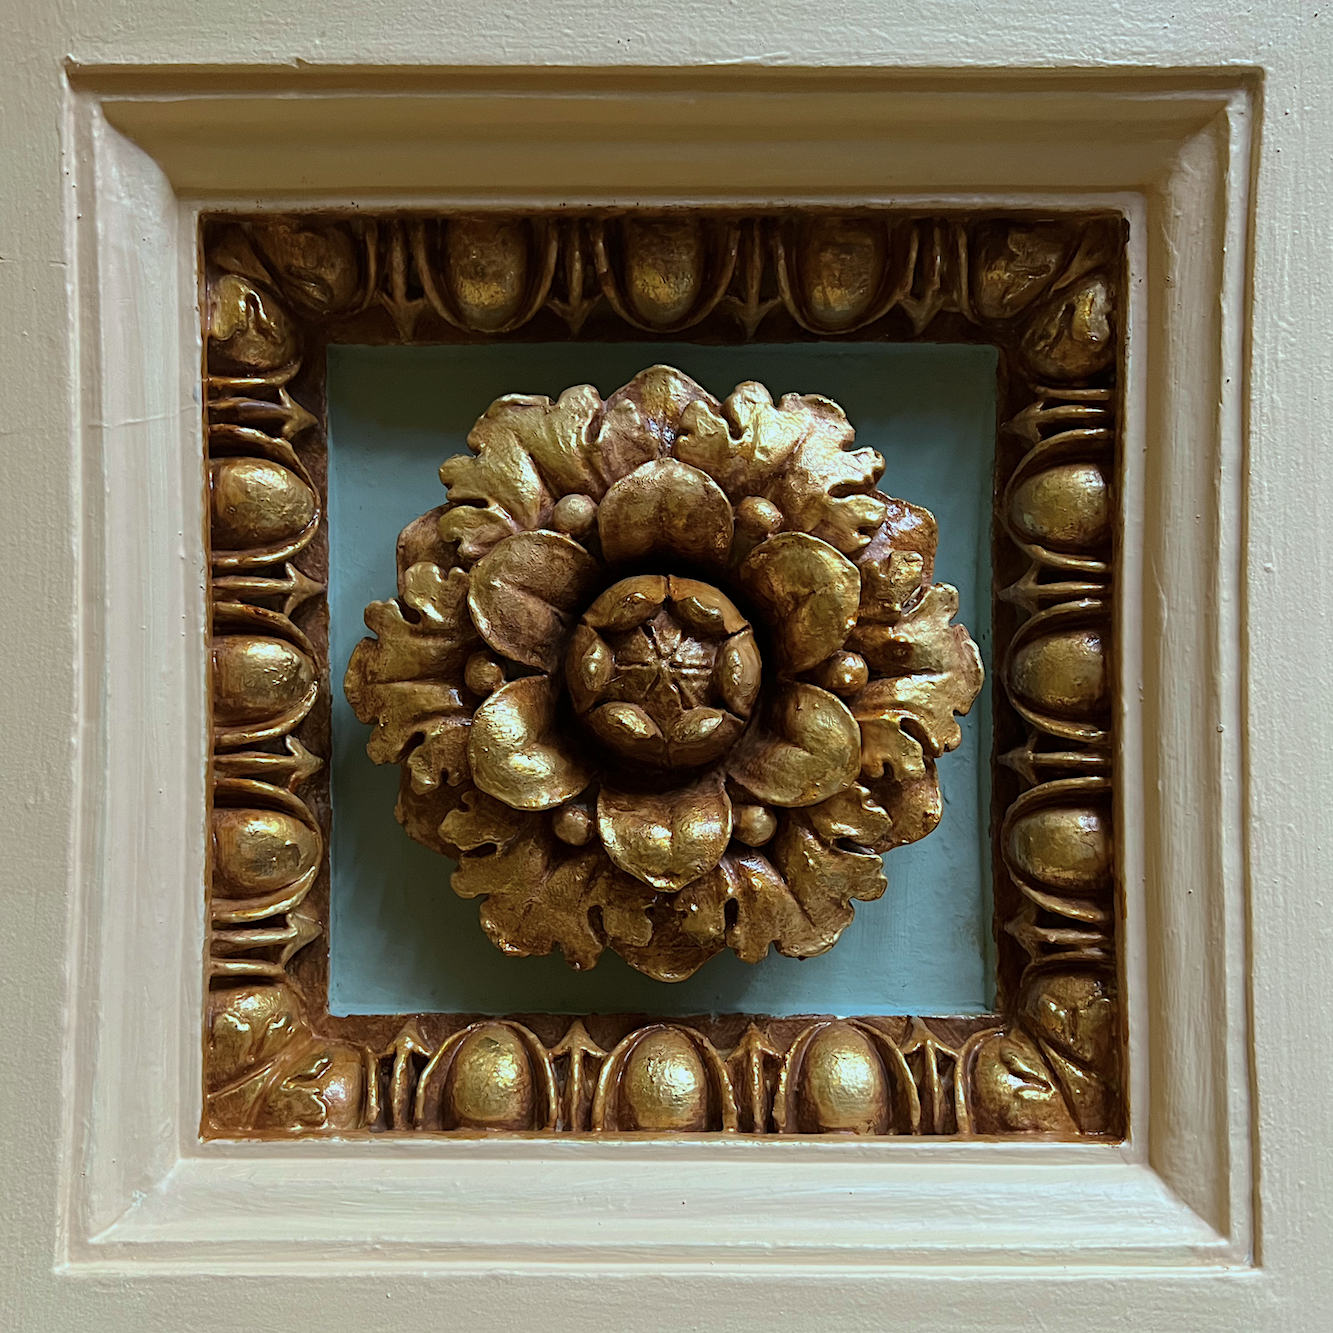 MA State House rosette detail